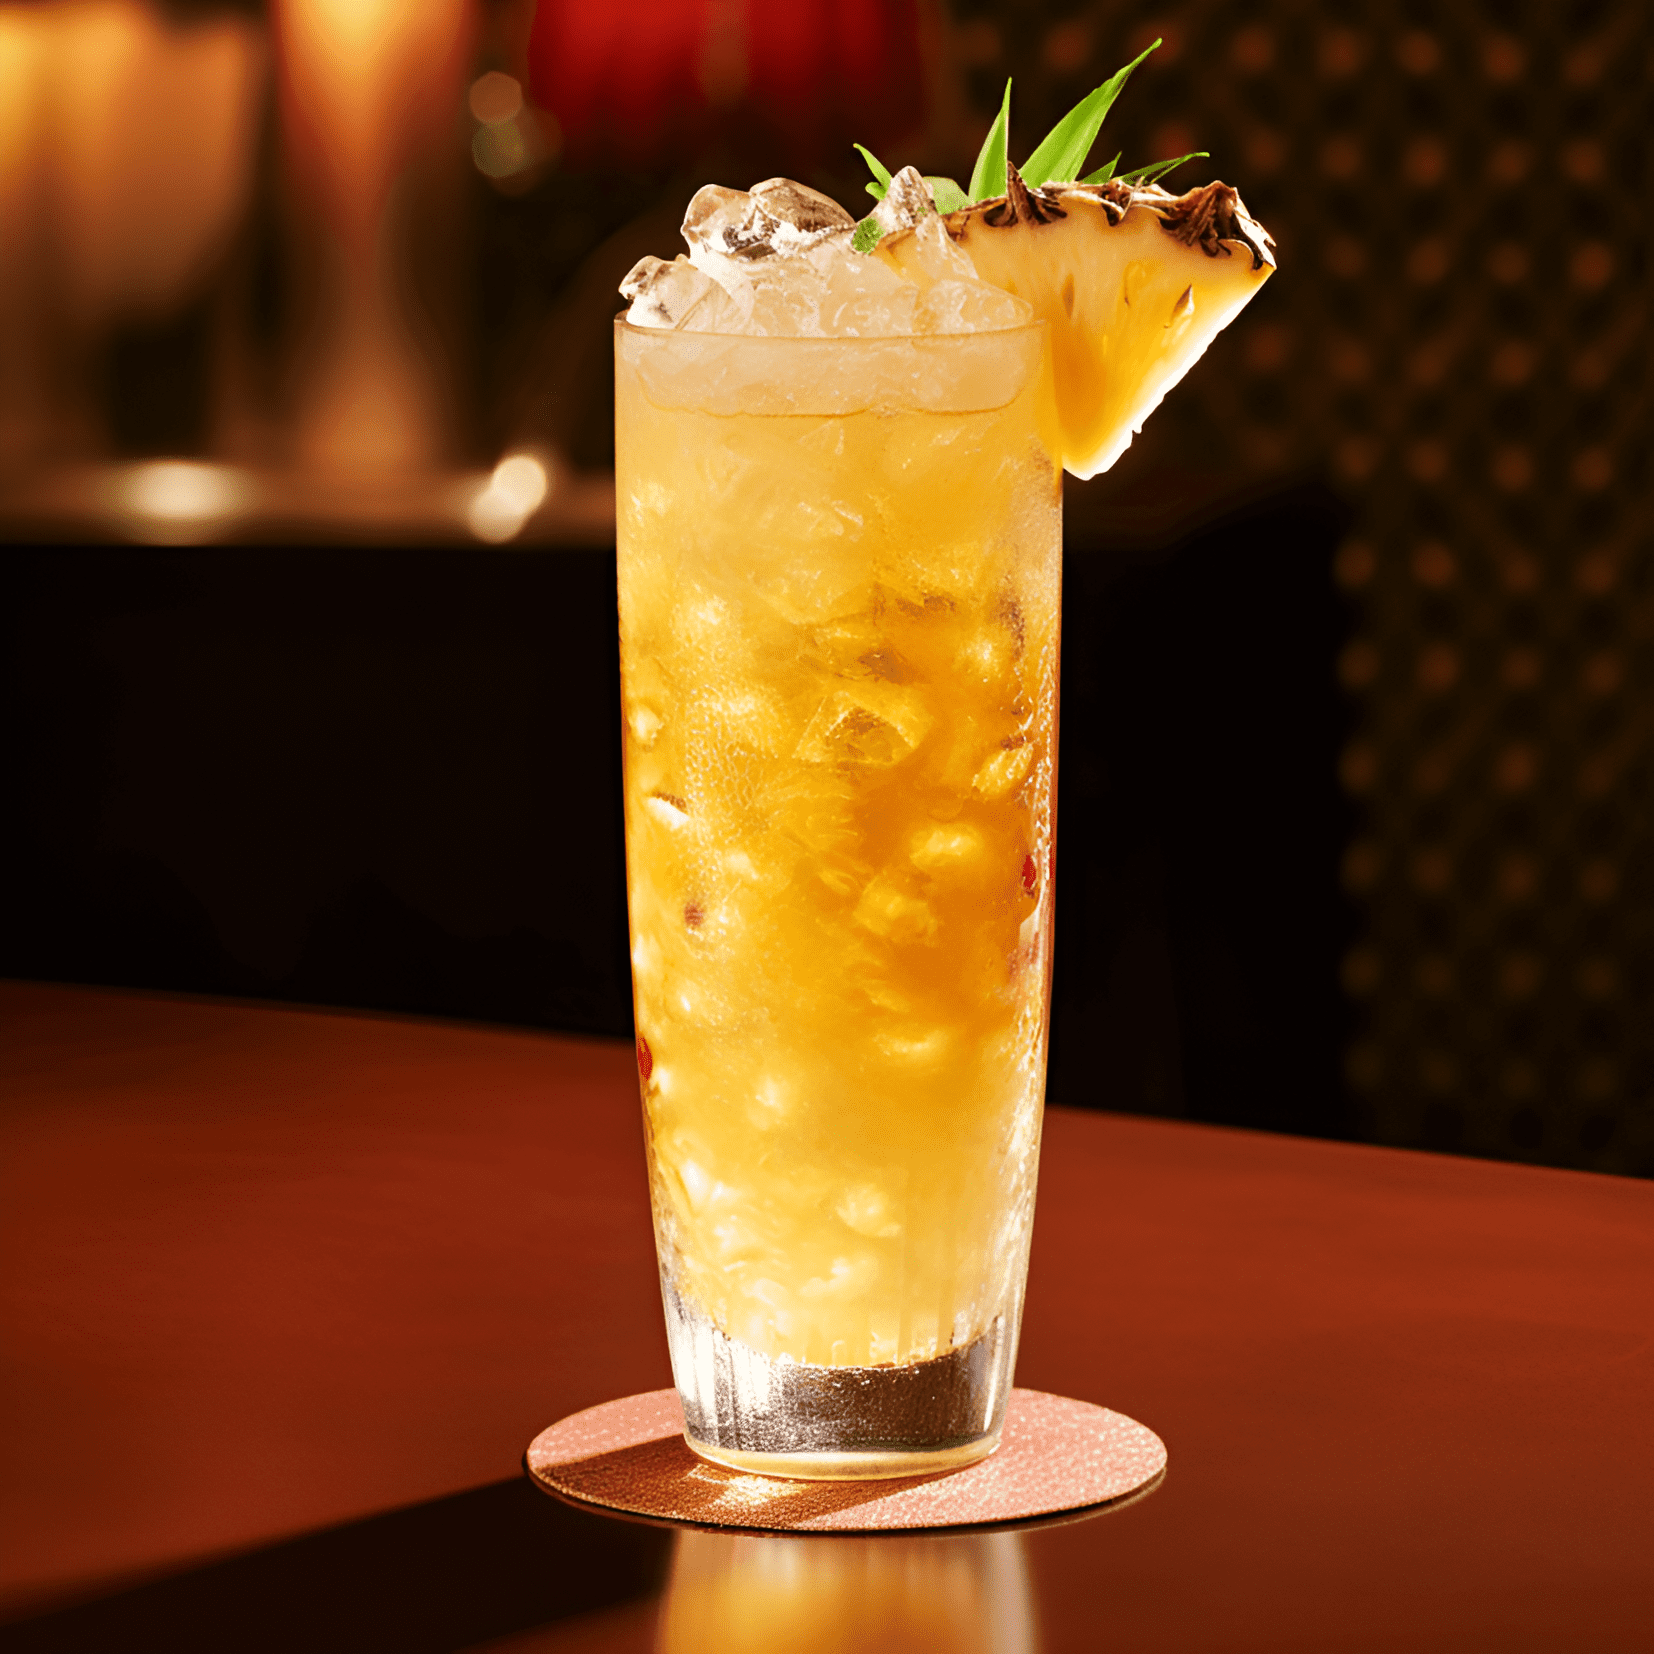 Pineapple Fizz Cocktail Recipe - The Pineapple Fizz is a delightful combination of sweet, sour, and slightly bitter flavors. The pineapple juice adds a tropical sweetness, while the lemon juice provides a tangy and refreshing balance. The gin adds a subtle herbal bitterness, and the club soda gives the cocktail a light, effervescent finish.